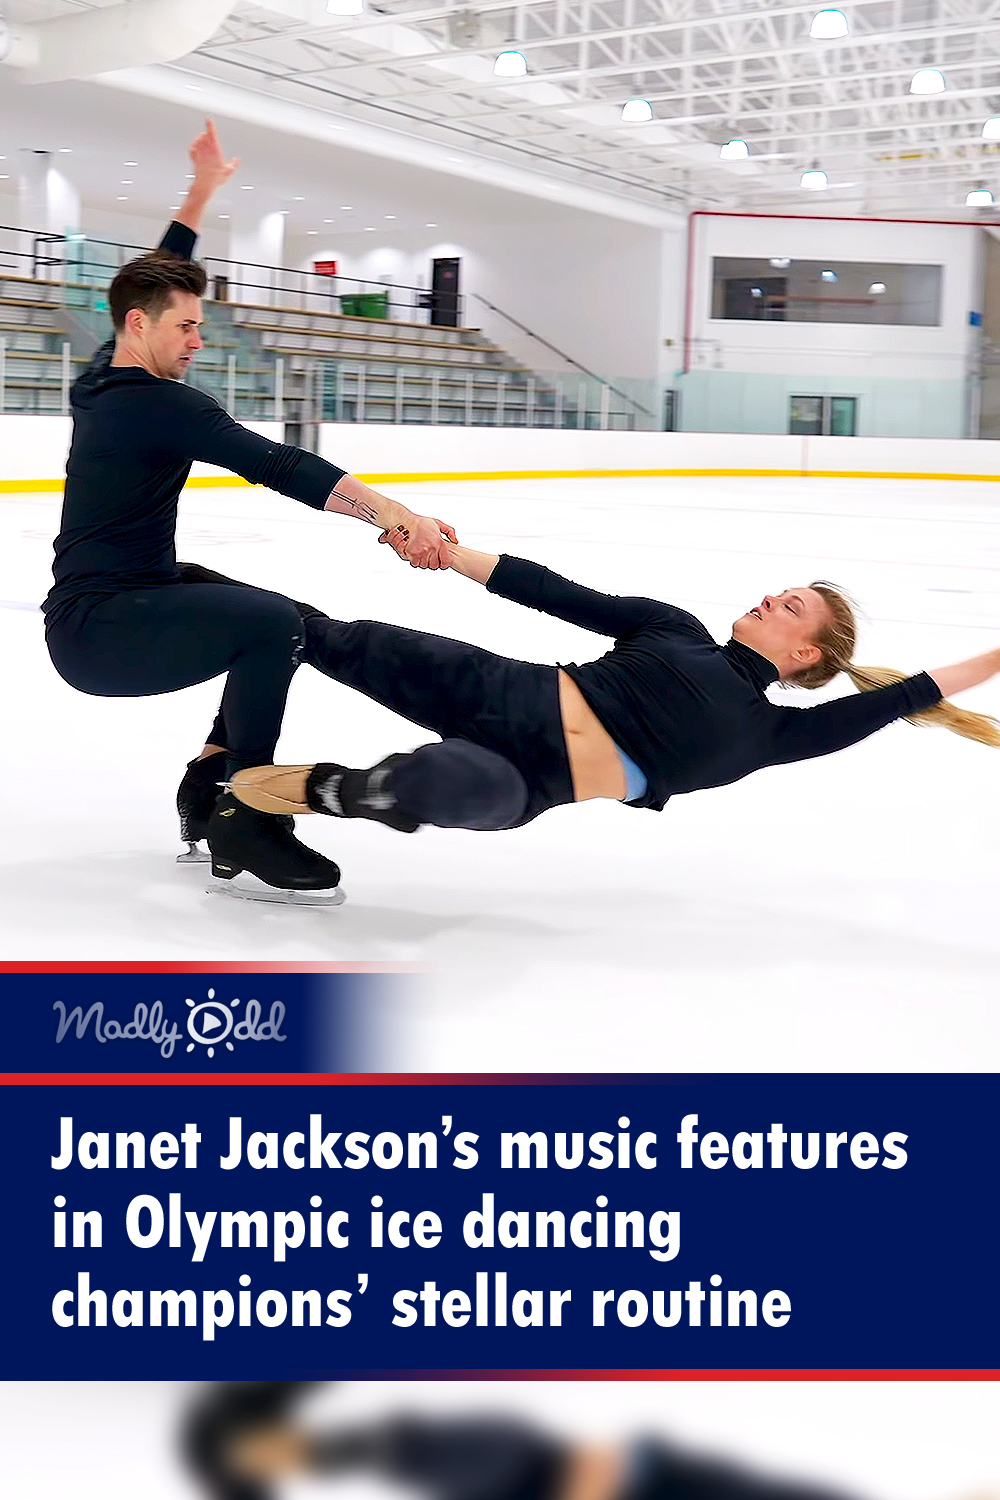 Janet Jackson’s music features in Olympic ice dancing champions’ stellar routine